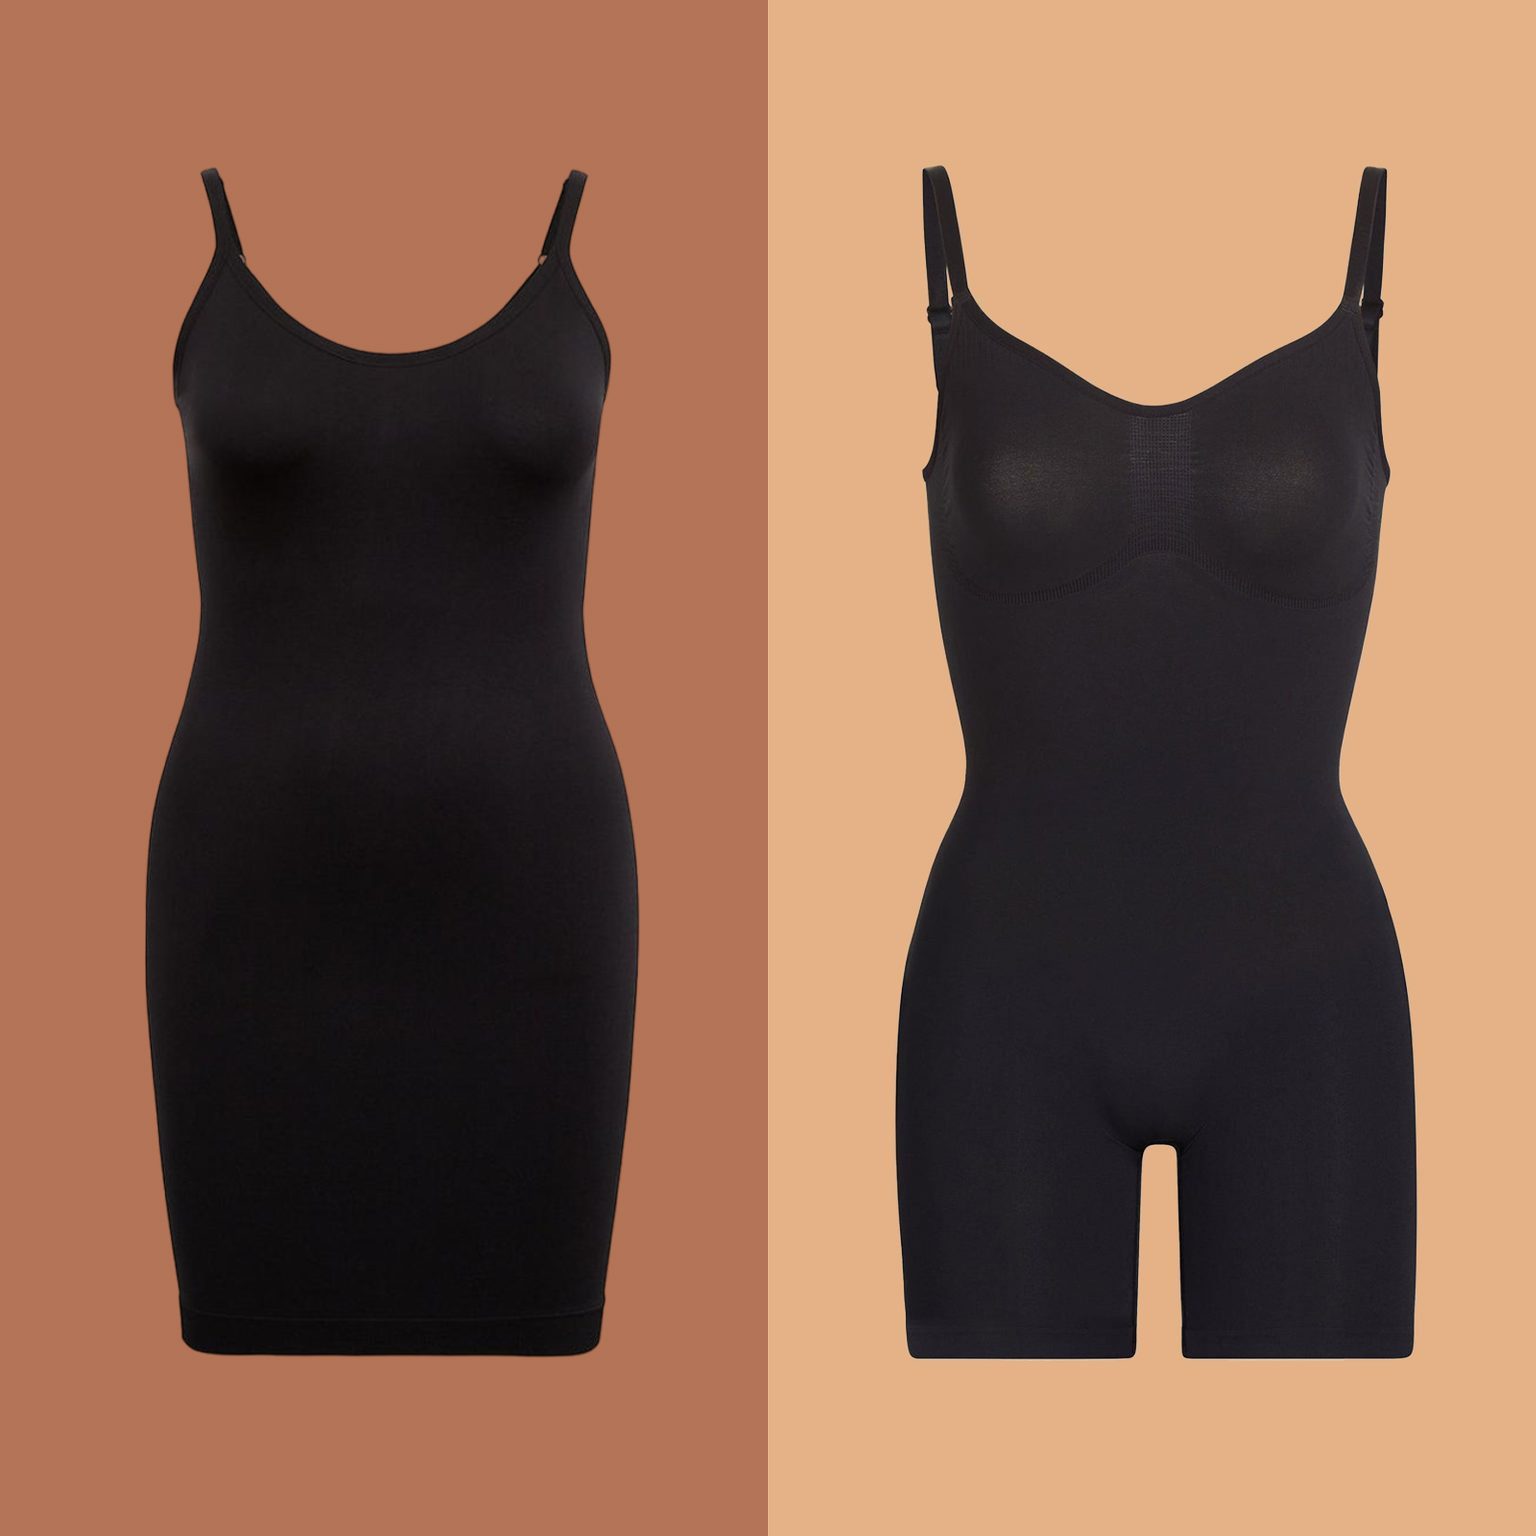 Shining Through The Holidays With Maidenform Shapewear - Happily Eva After